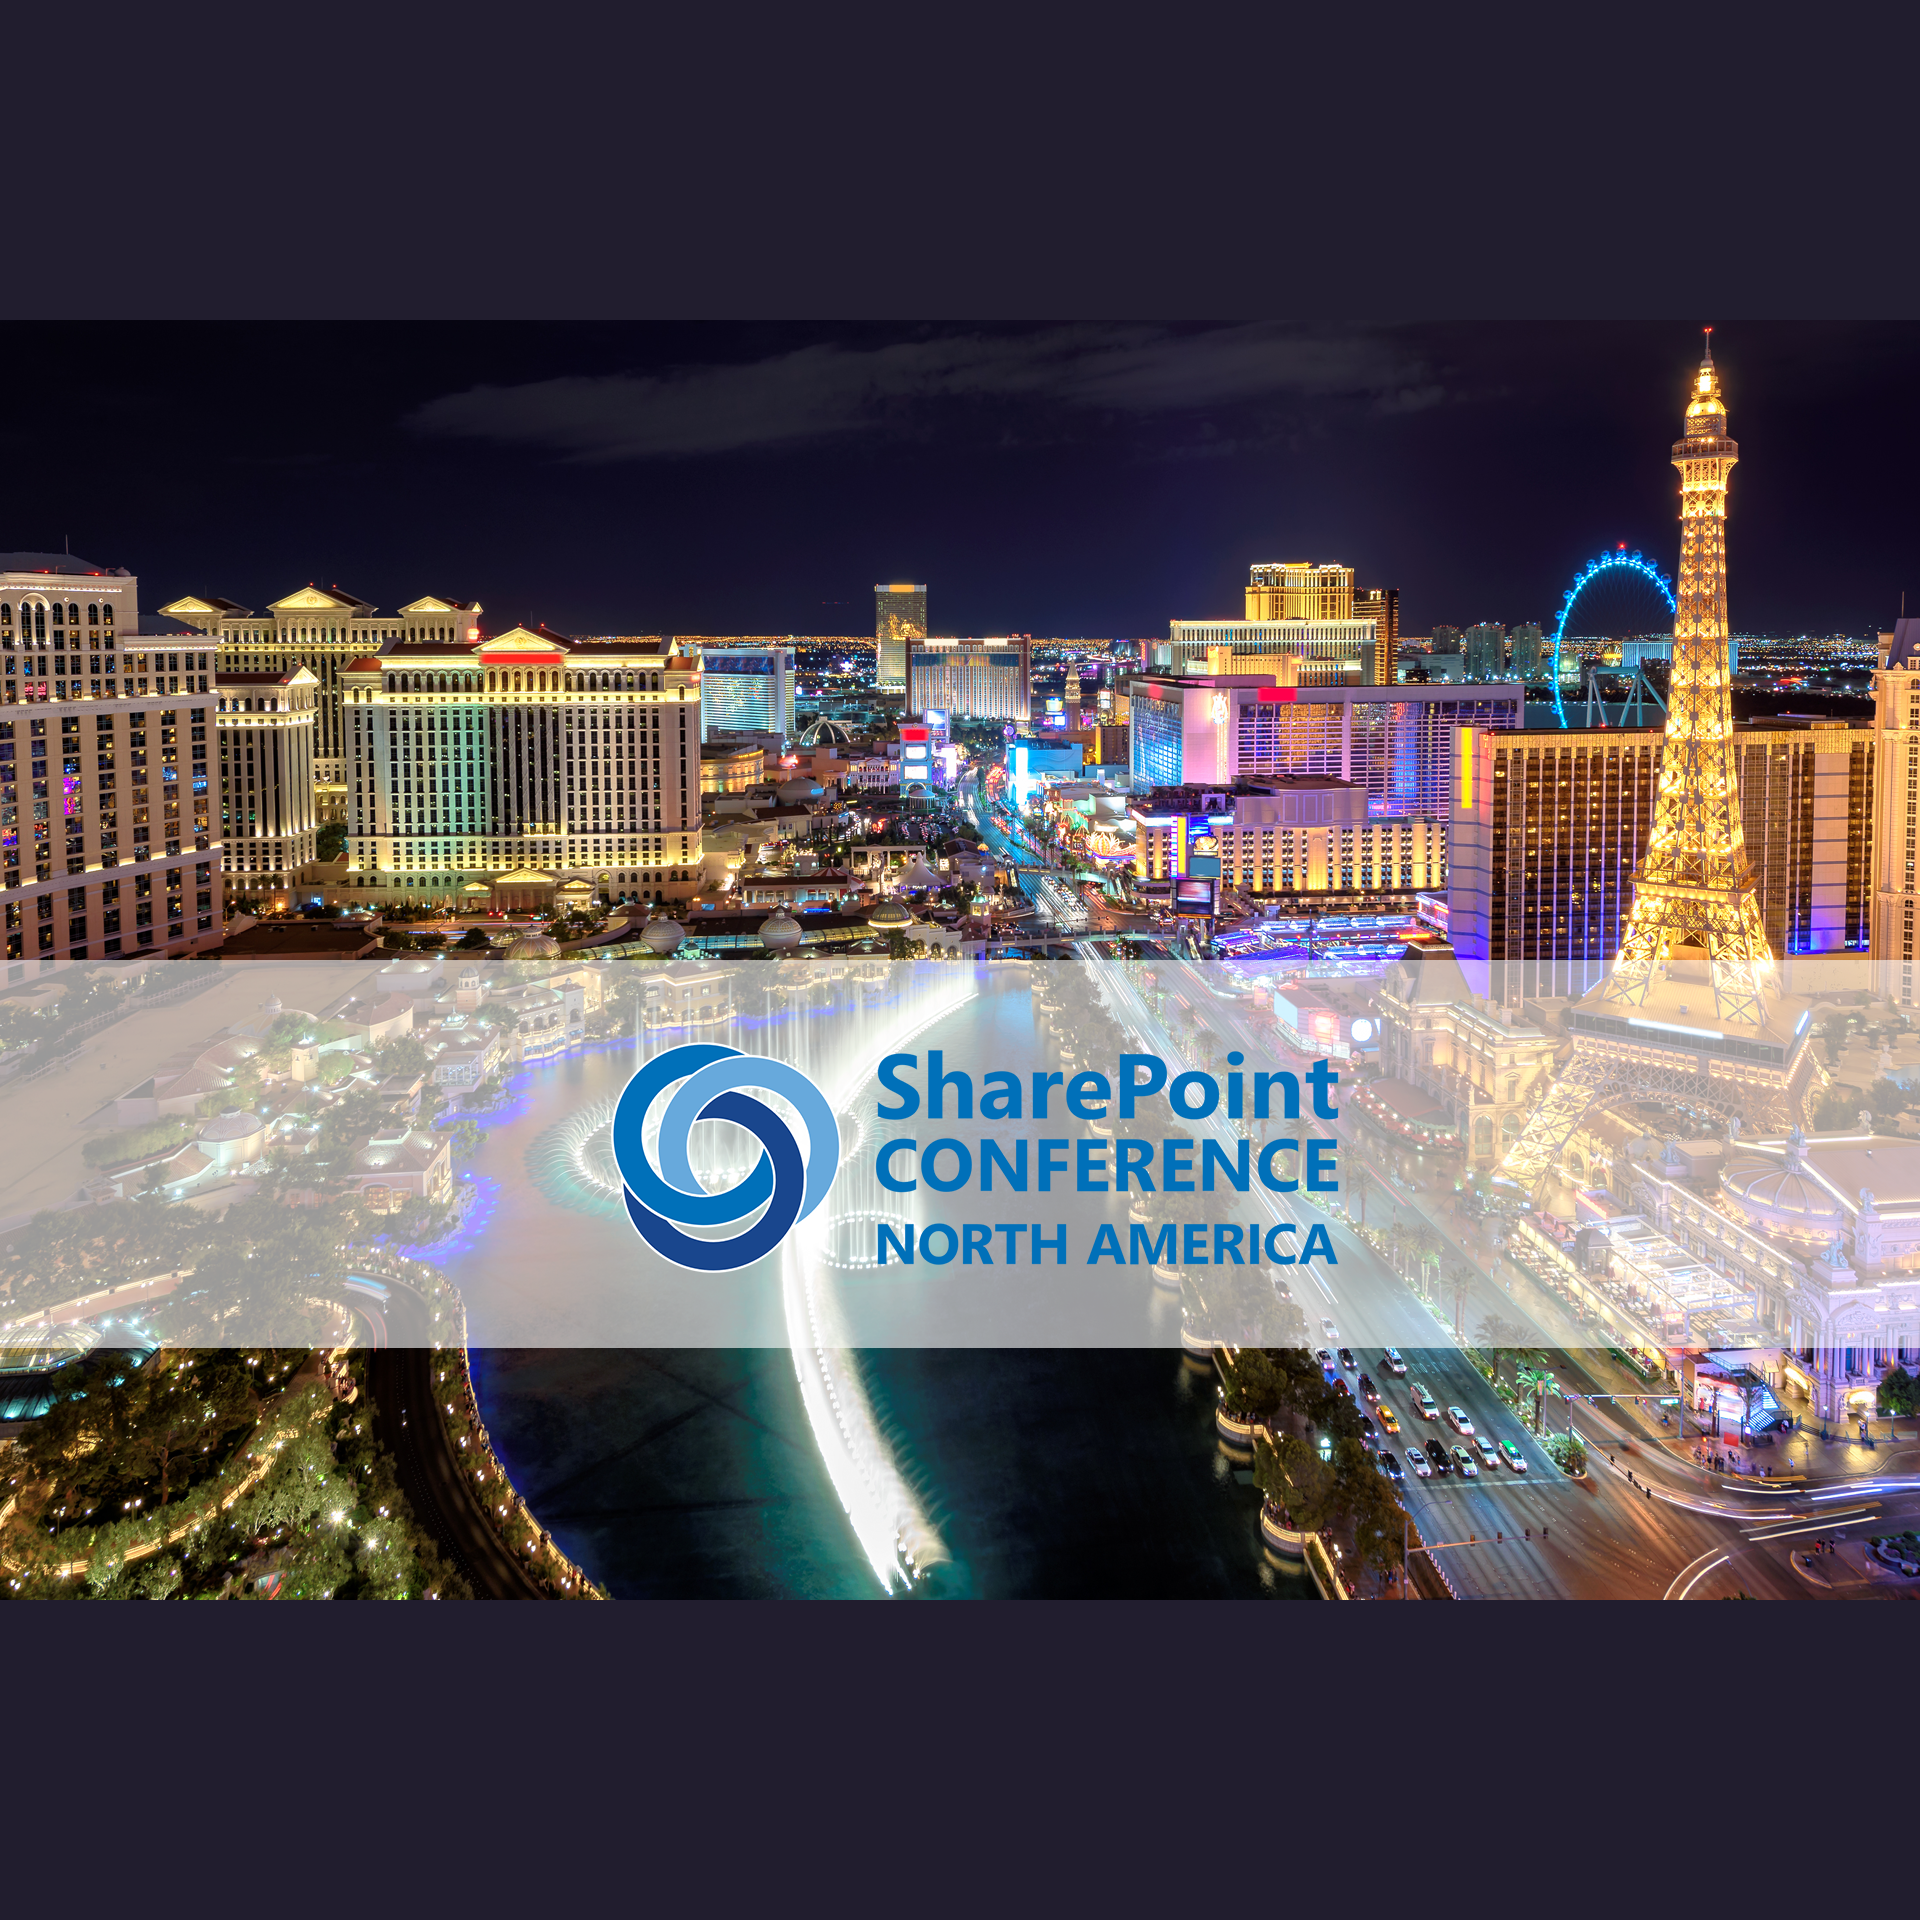 Image for blog article SharePoint Conference North America 2018 Announcements and Articles